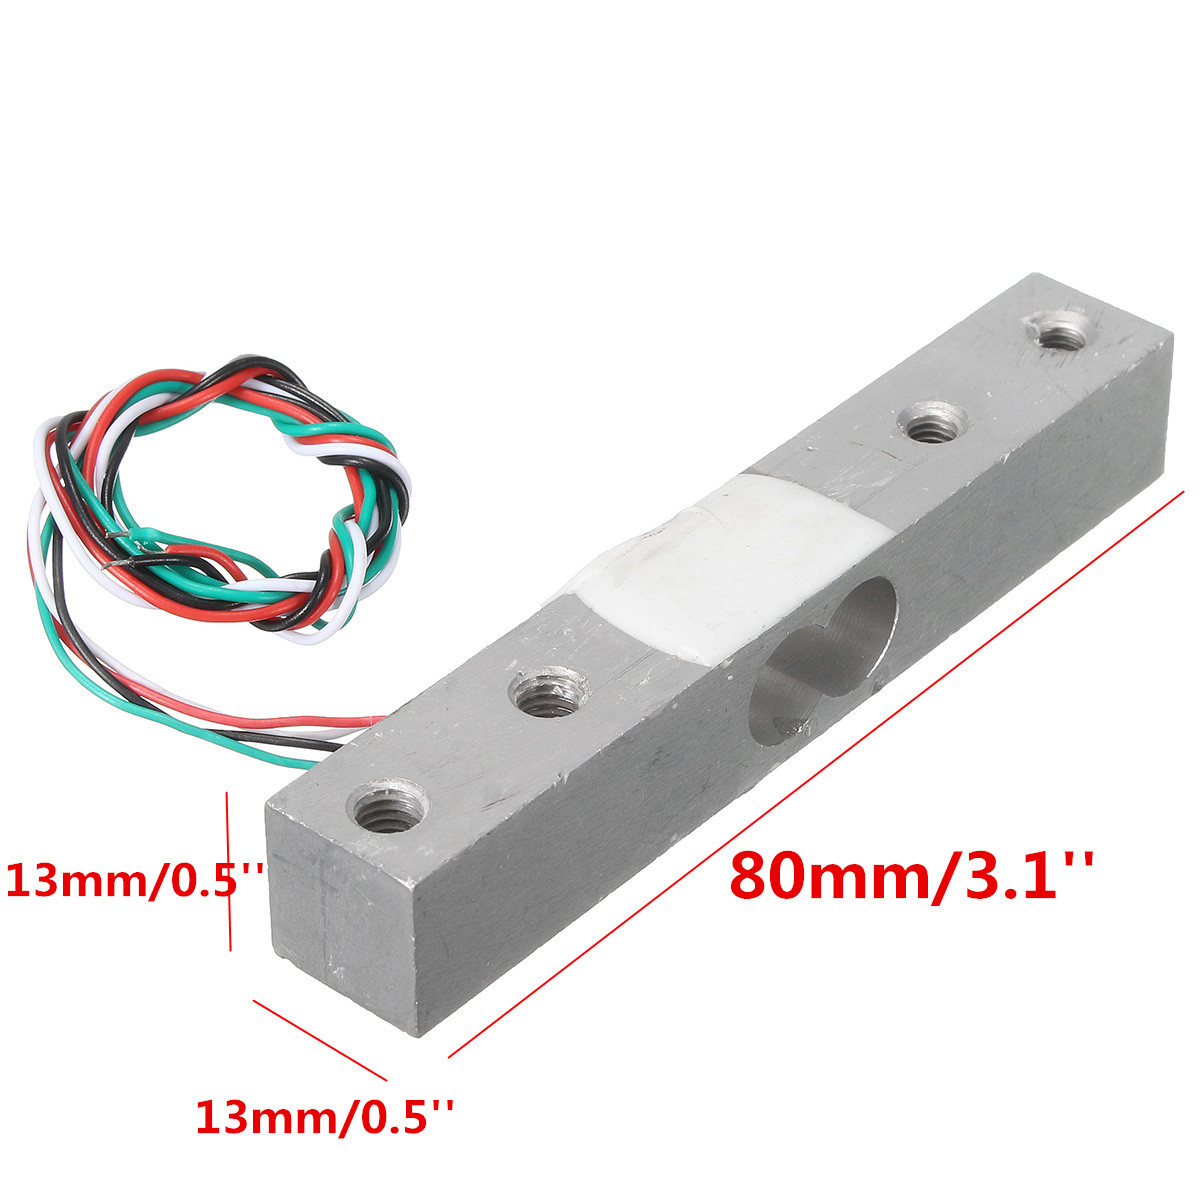 HX711-Module--20kg-Aluminum-Alloy-Scale-Weighing-Sensor-Load-Cell-Kit-1112121-2